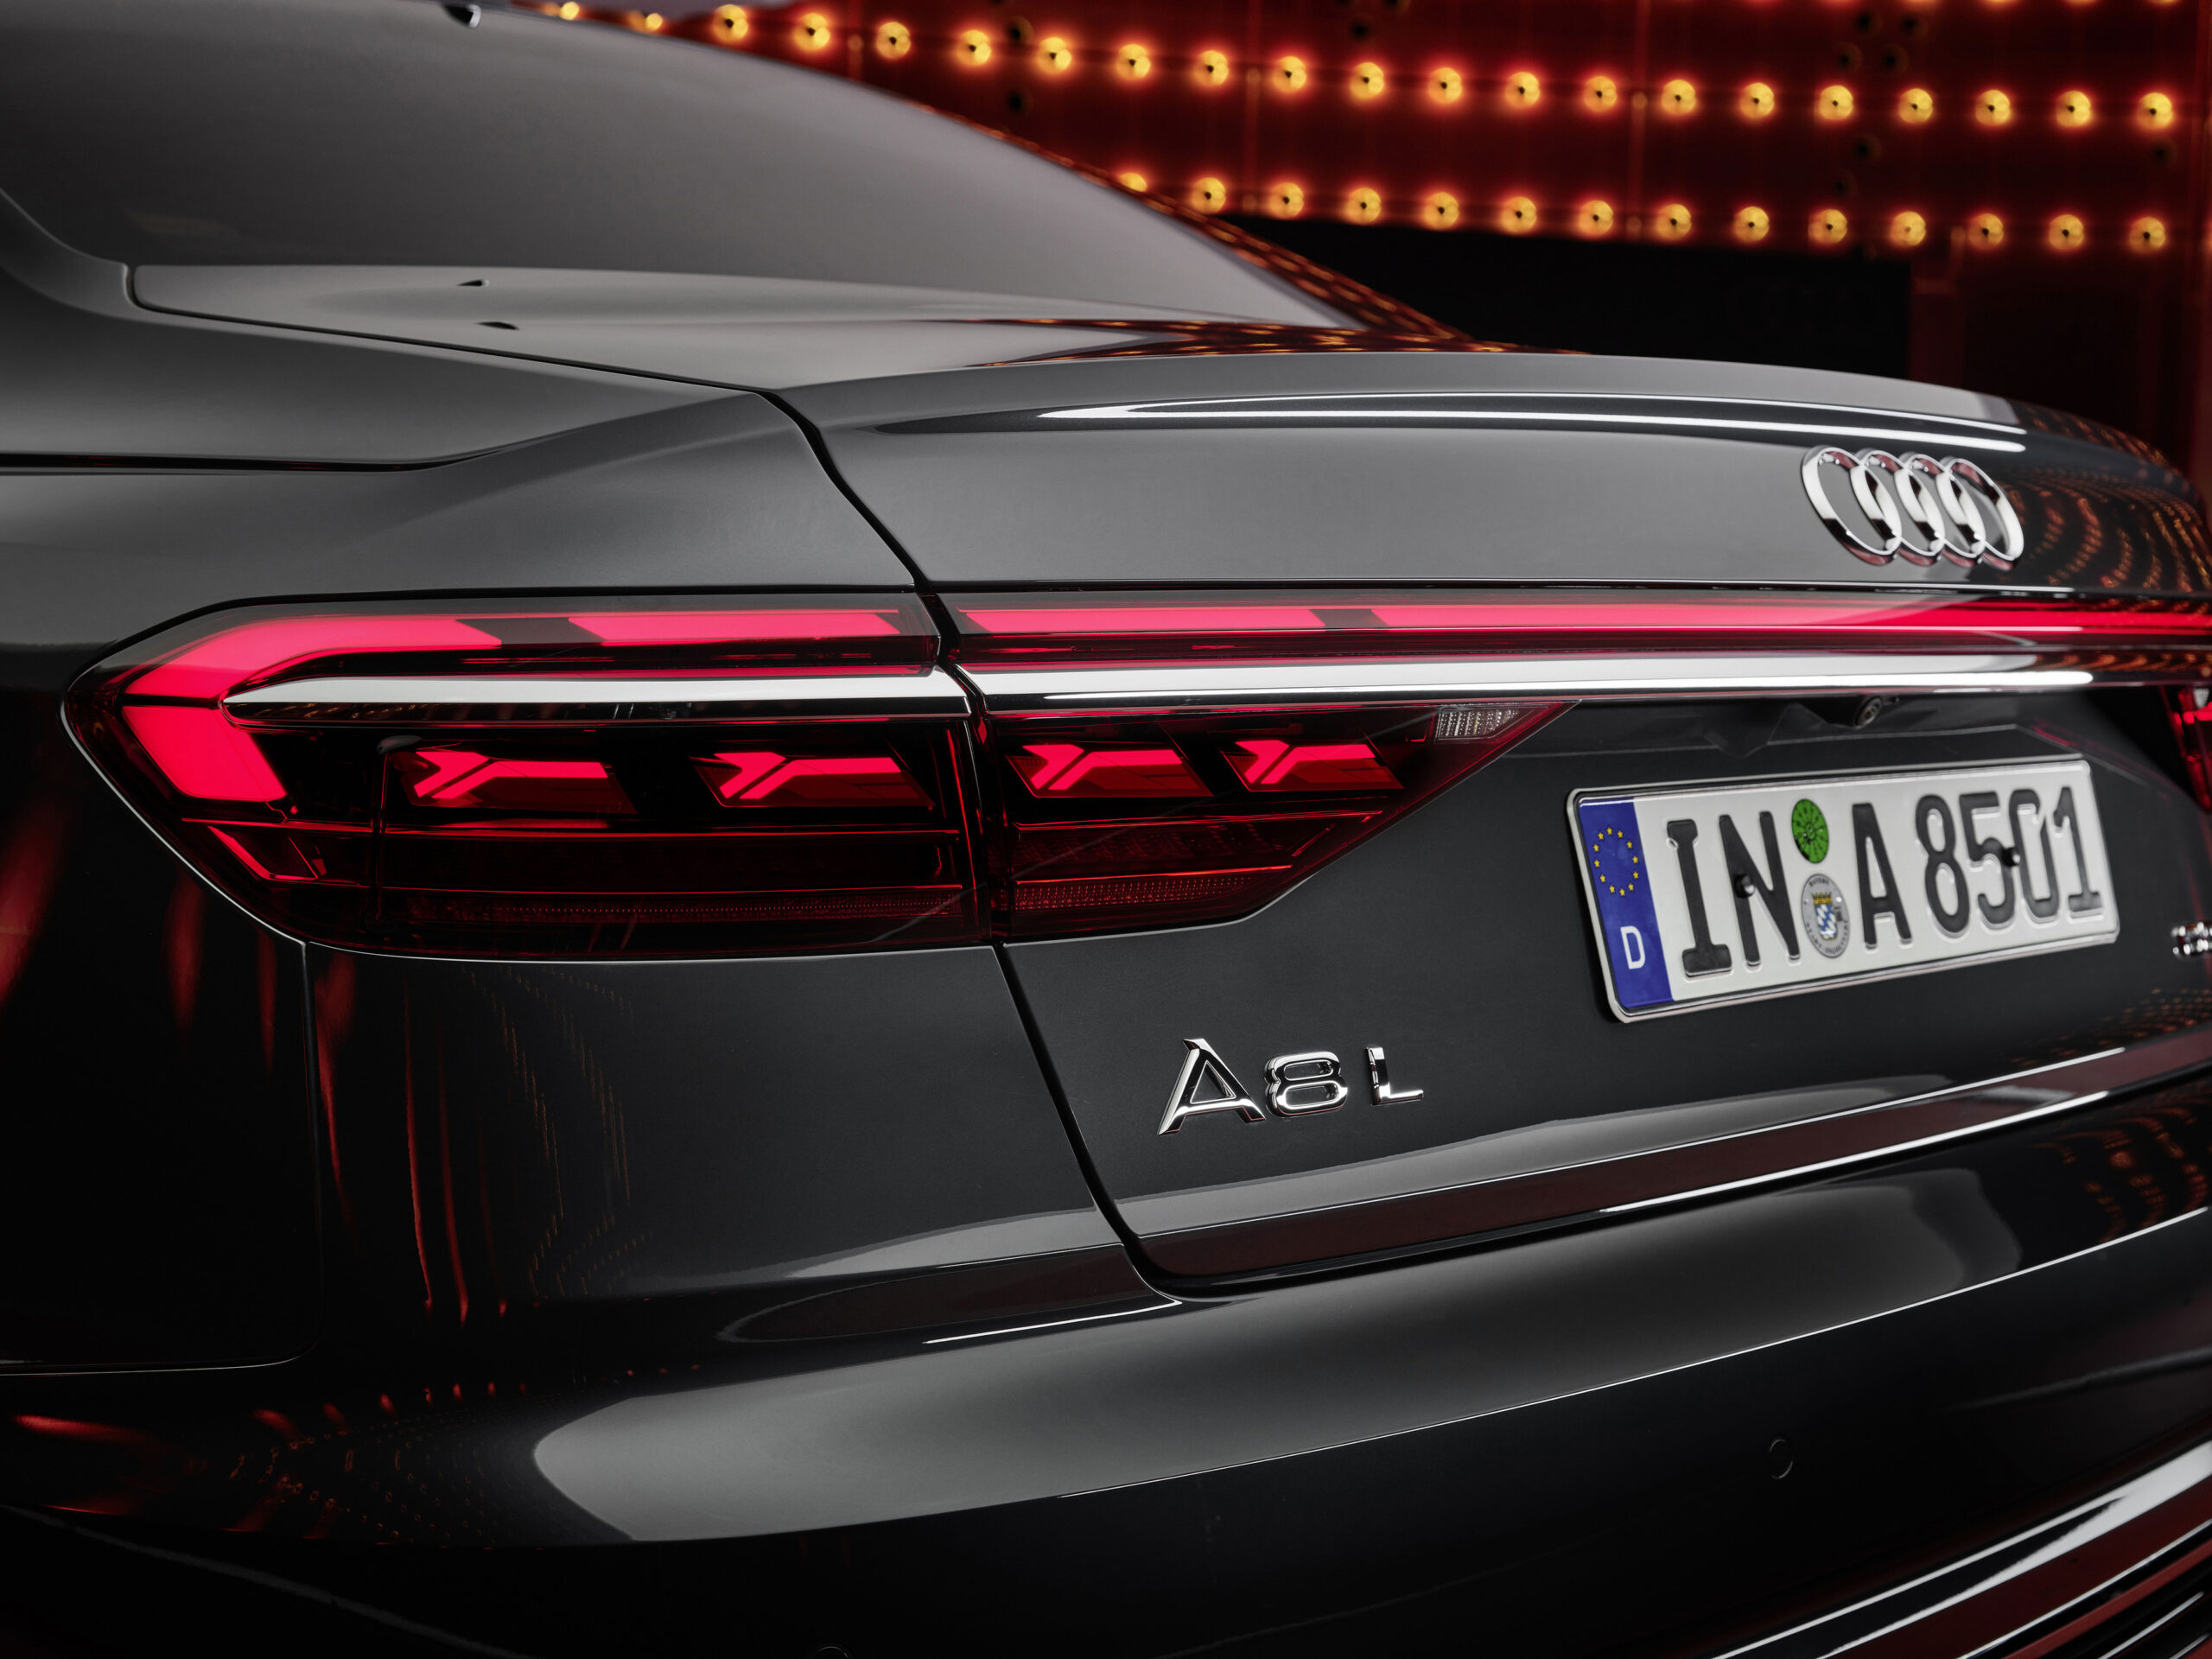 OLEDWorks rear OLED lighting technology in the Audi A8